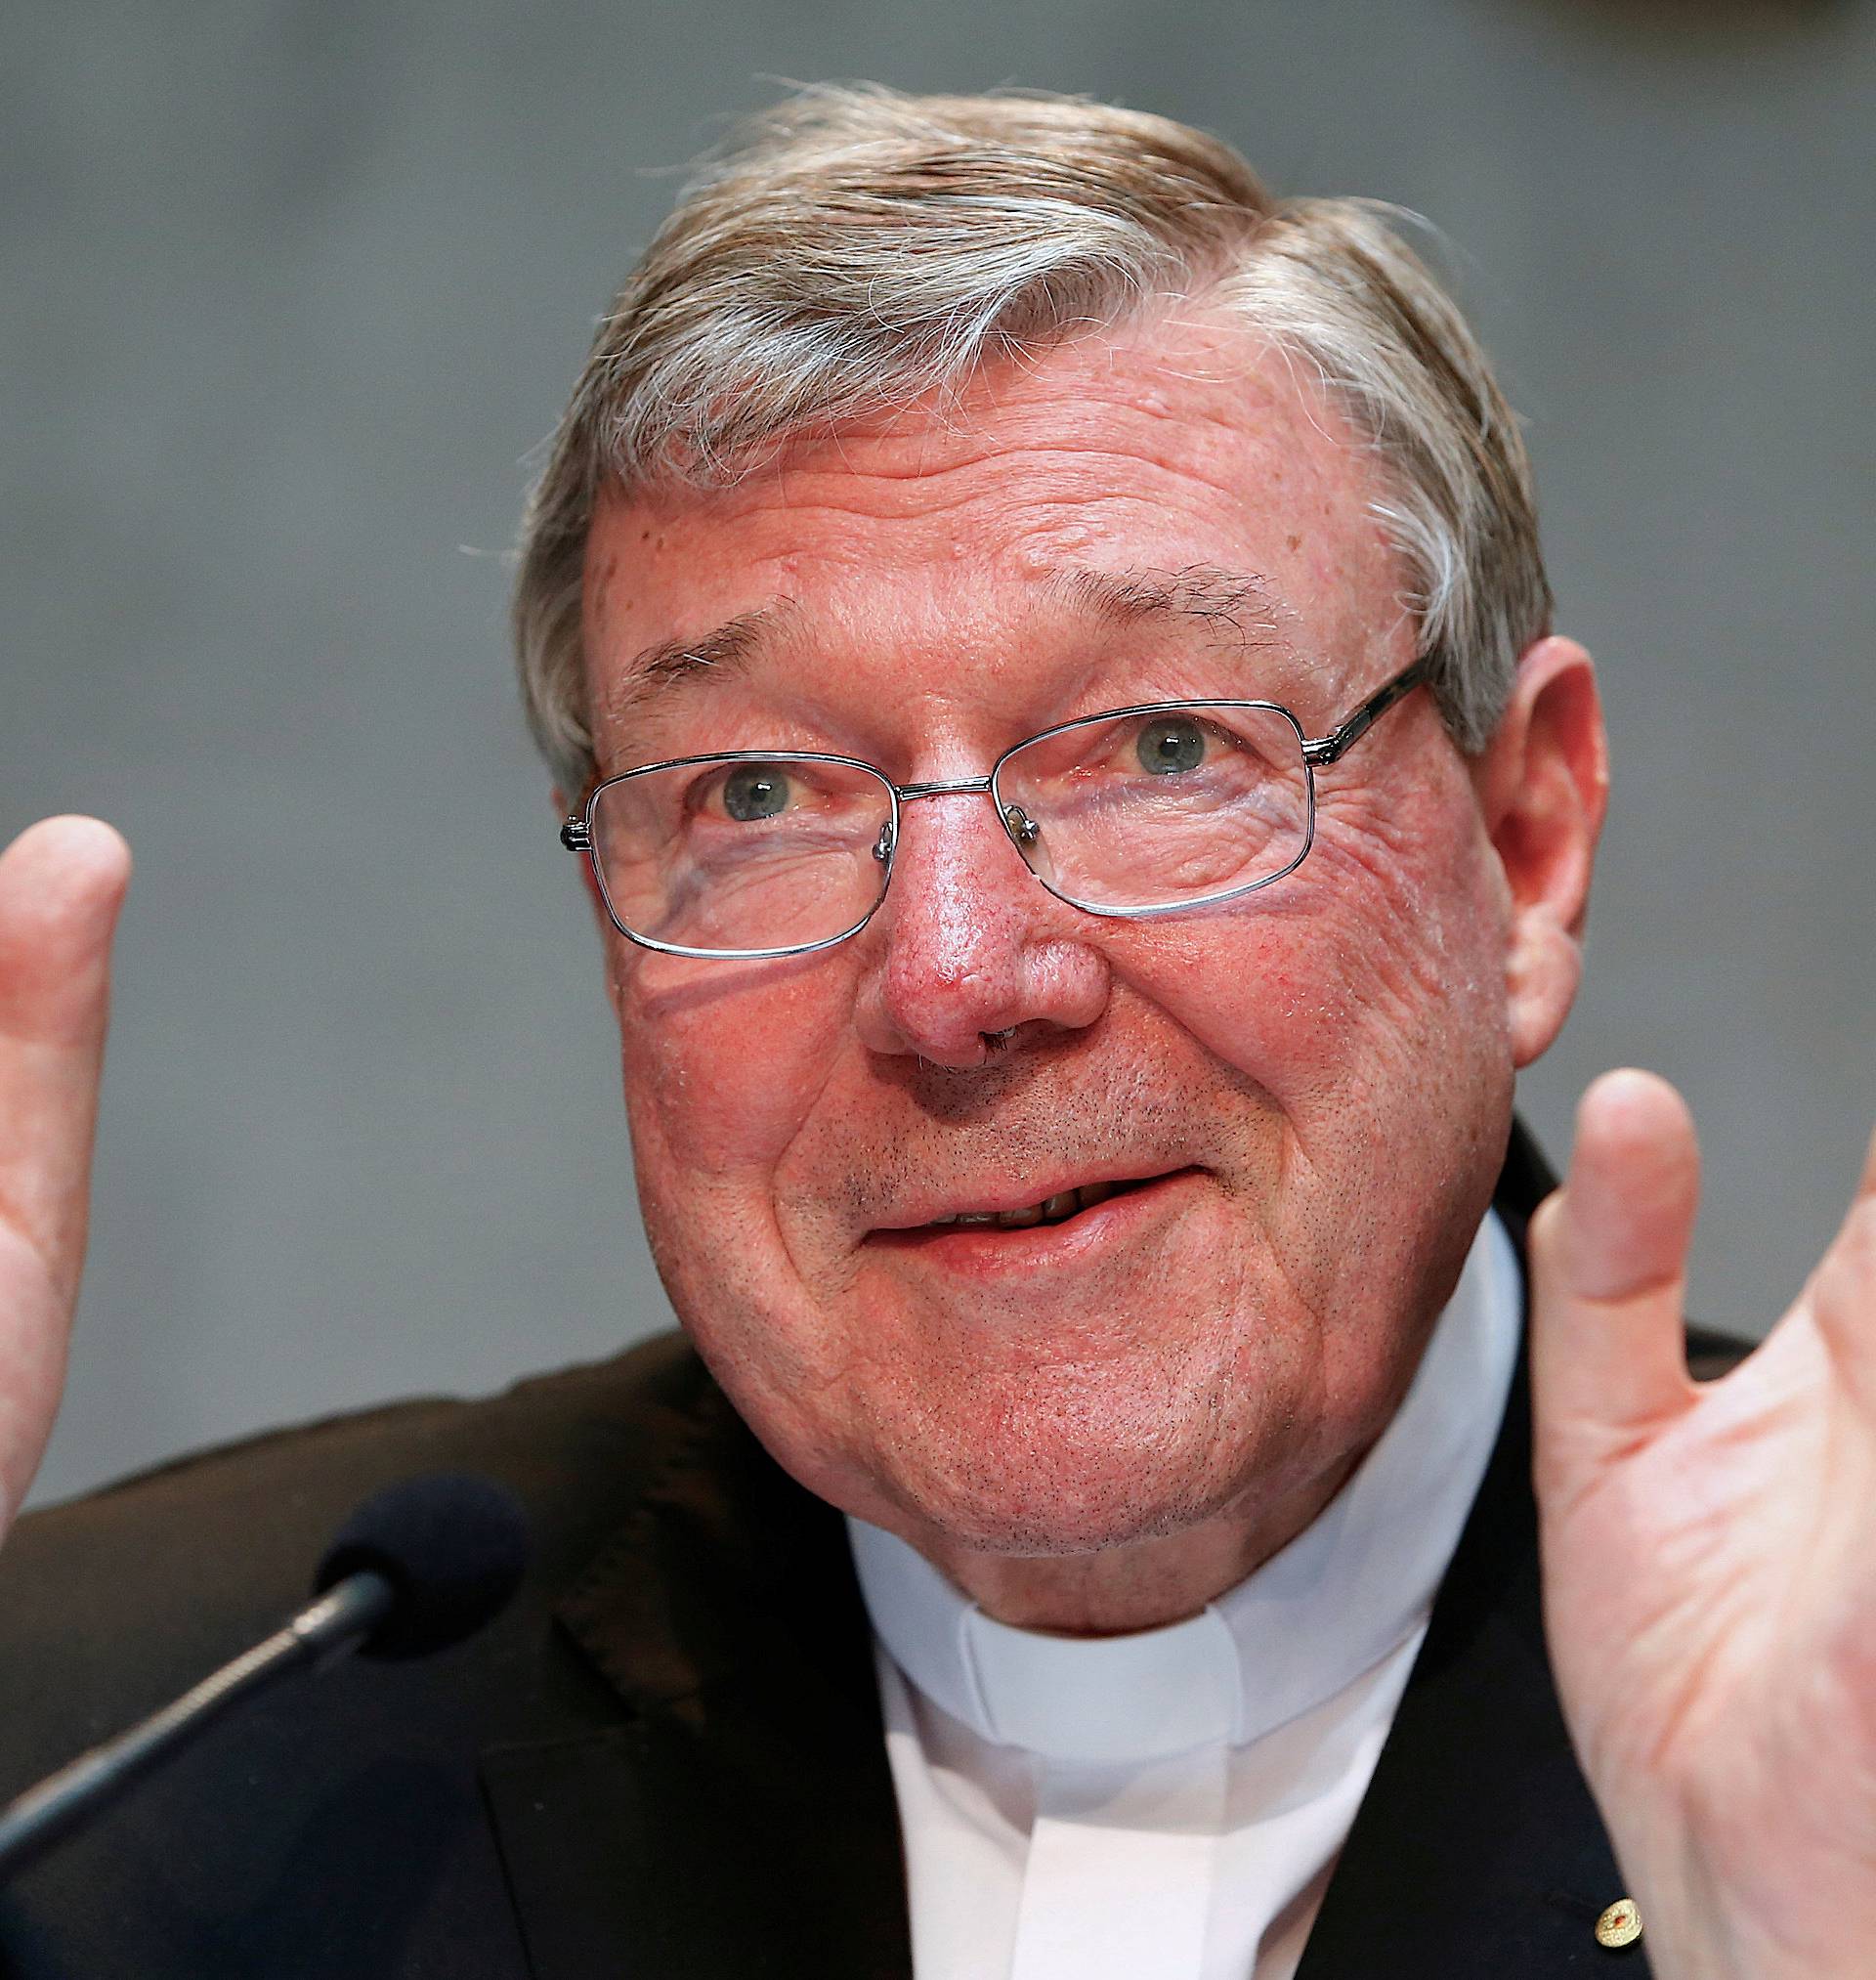 FILE PHOTO - Cardinal George Pell gestures as he talks during a news conference for the presentation of new president of Vatican Bank IOR at the Vatican